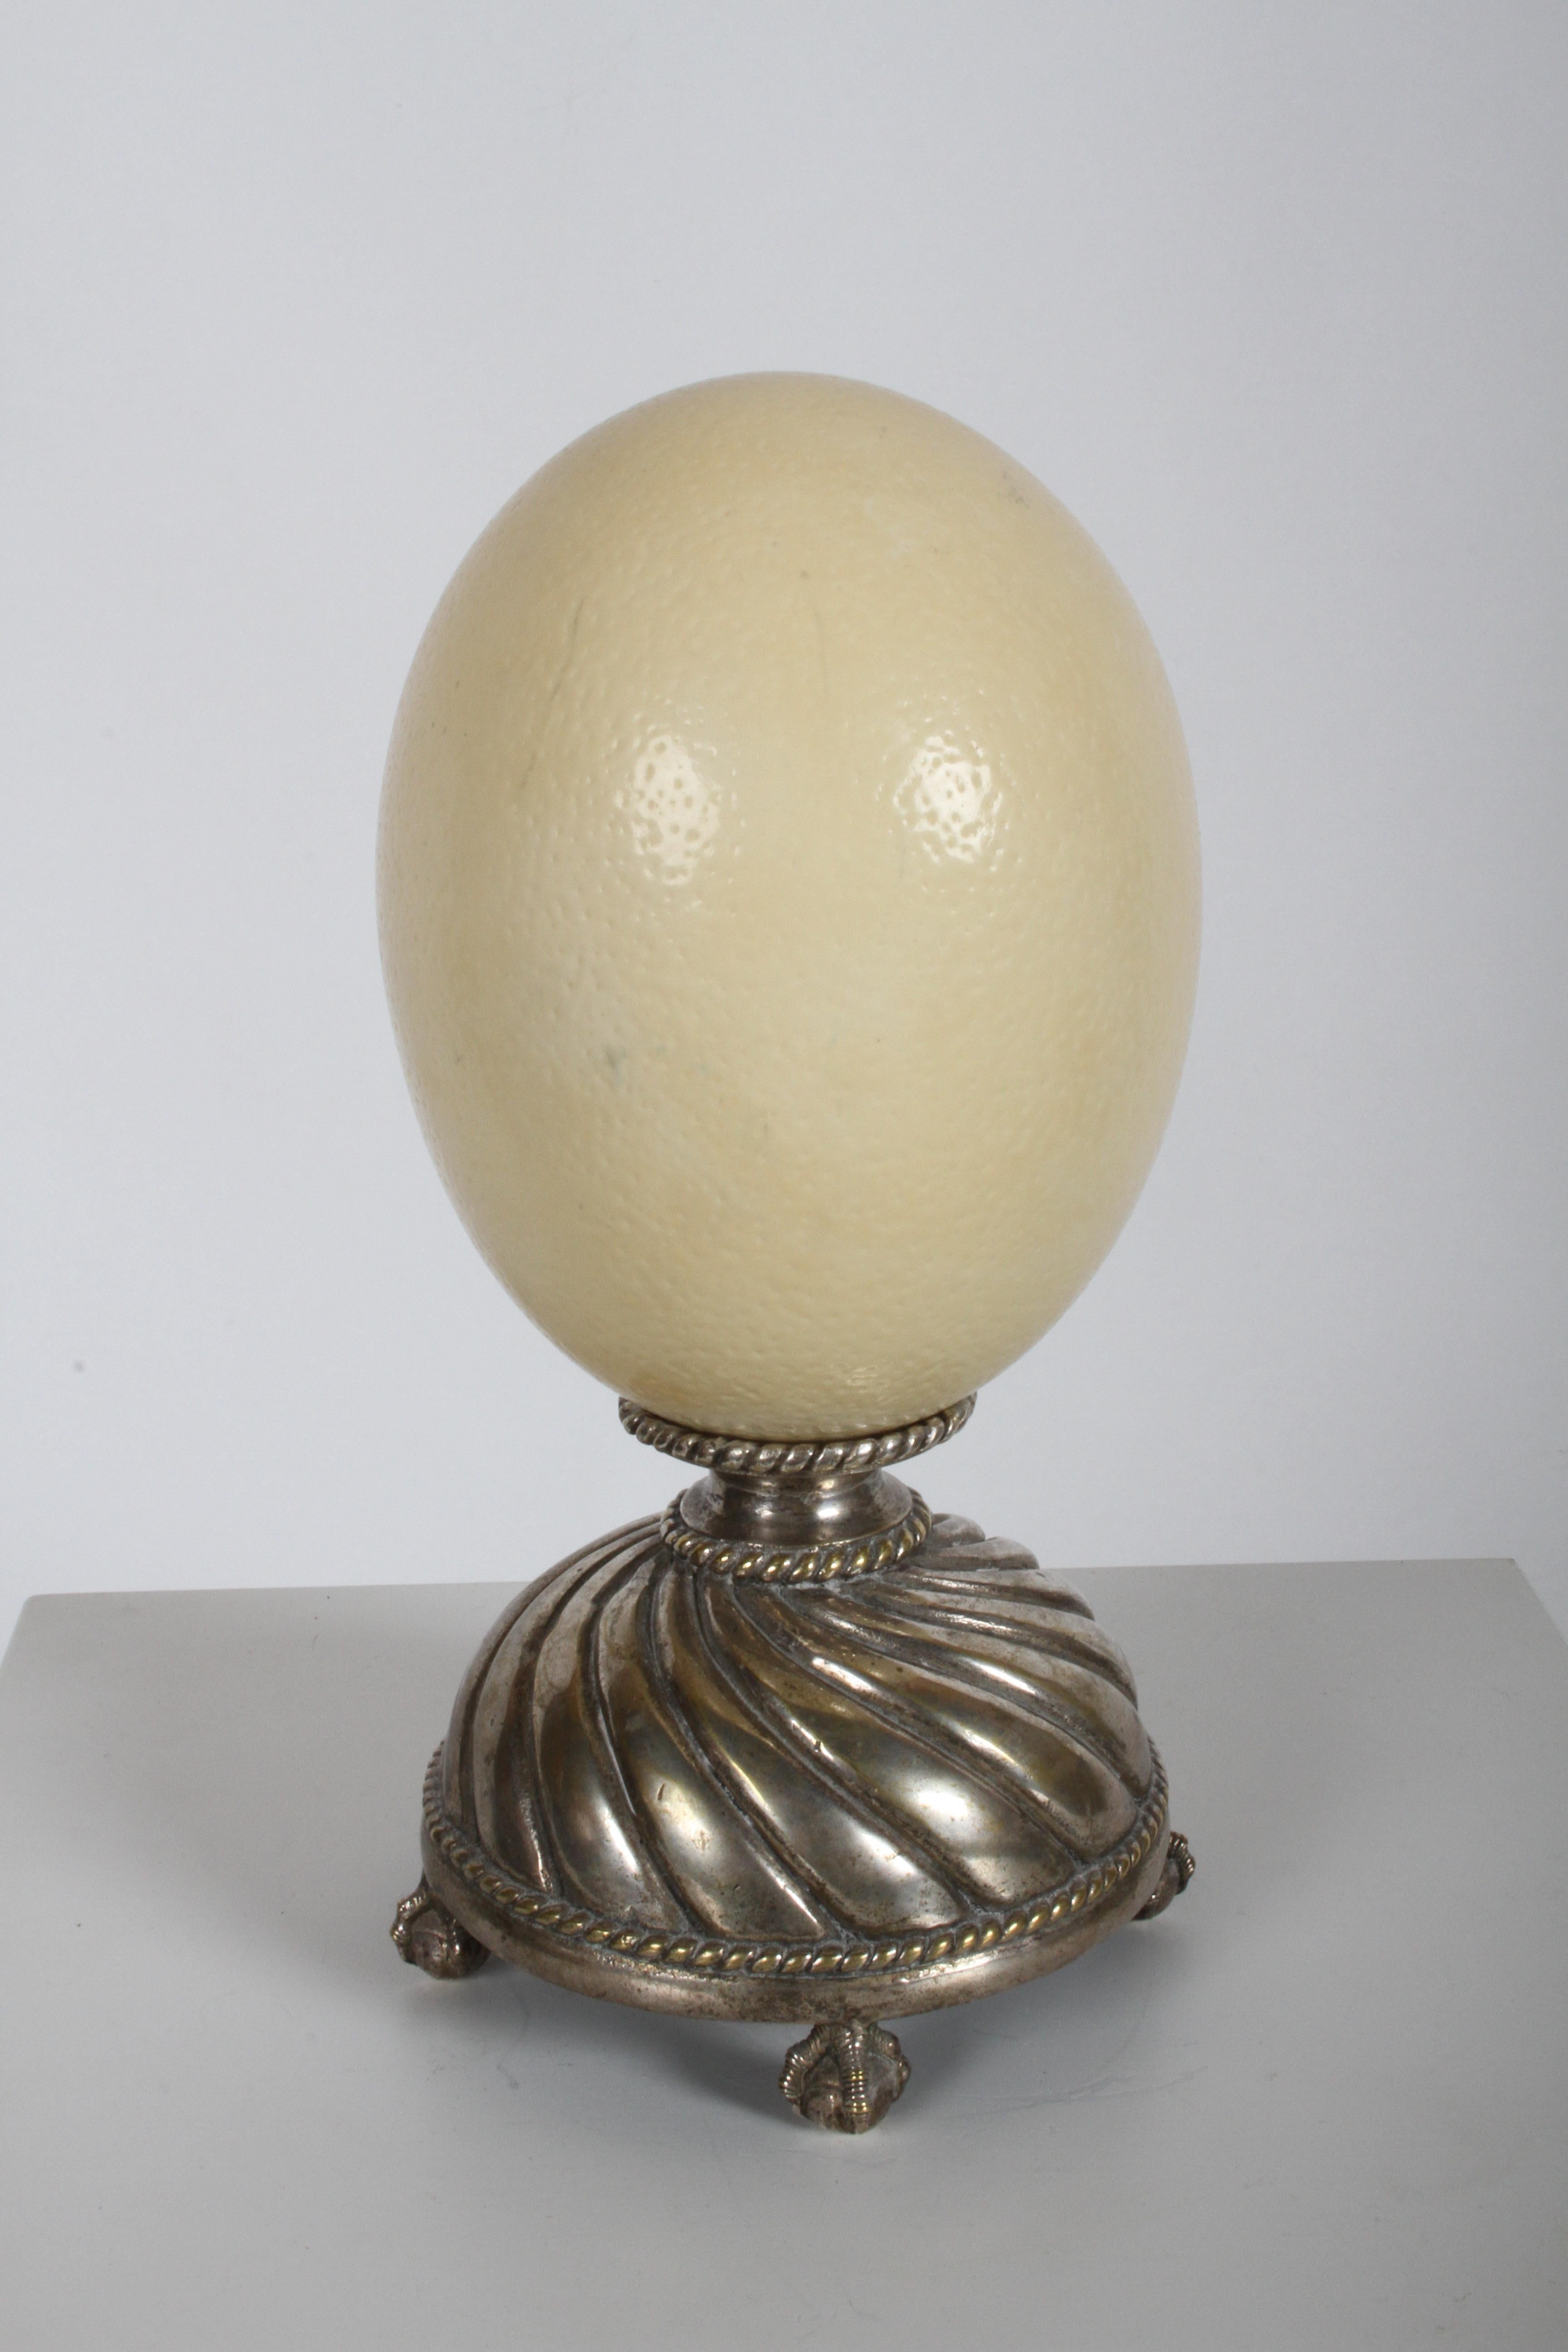 Maitland-Smith decorative real ostrich egg on bilverplate base with ball and claw feet, circa late 1970s or 1980s. Label. Wear to silver plate, light discoloration to Ostrich Egg. No cracks or breaks.